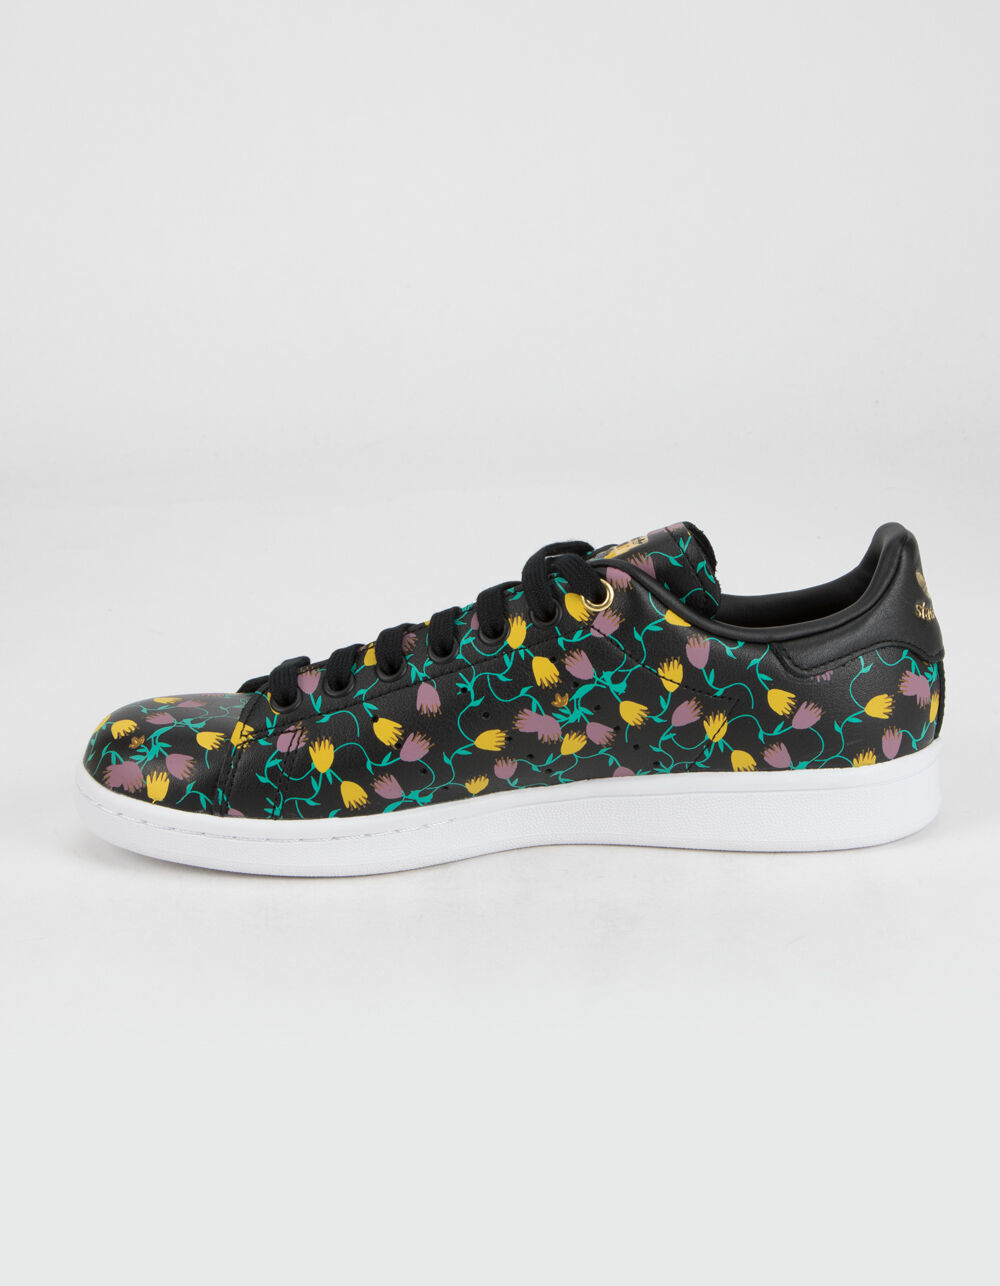 Women's Adidas Stan Smith Floral Print Sneaker ($85) ❤ liked on Polyvore  featuring shoes, sneakers, adidas tr…